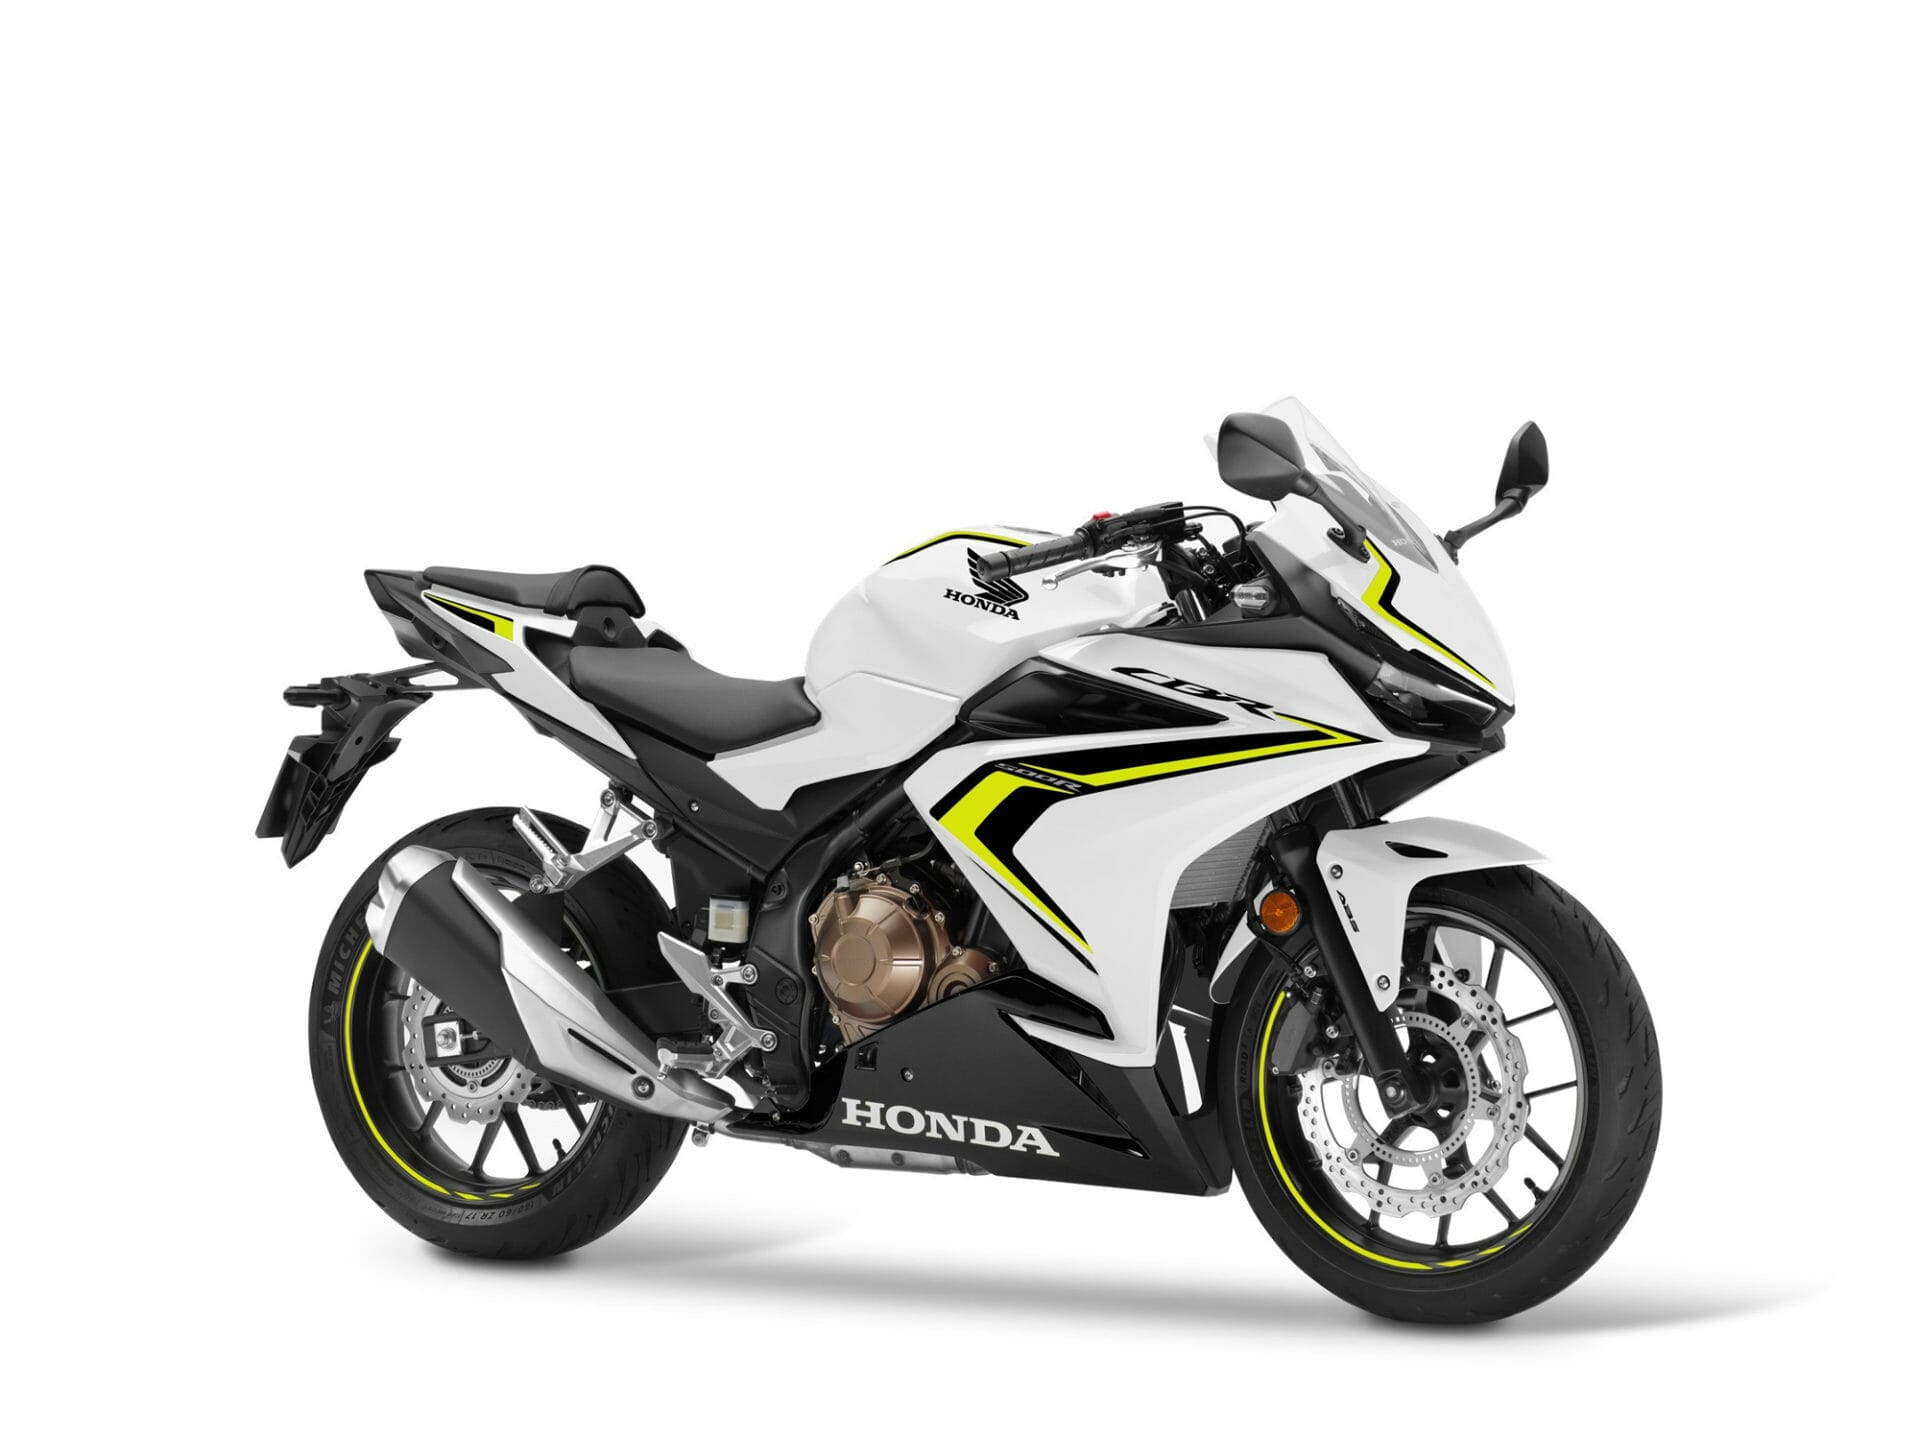 Major Honda recall due to faulty reflectors
- also in the MOTORCYCLES.NEWS APP